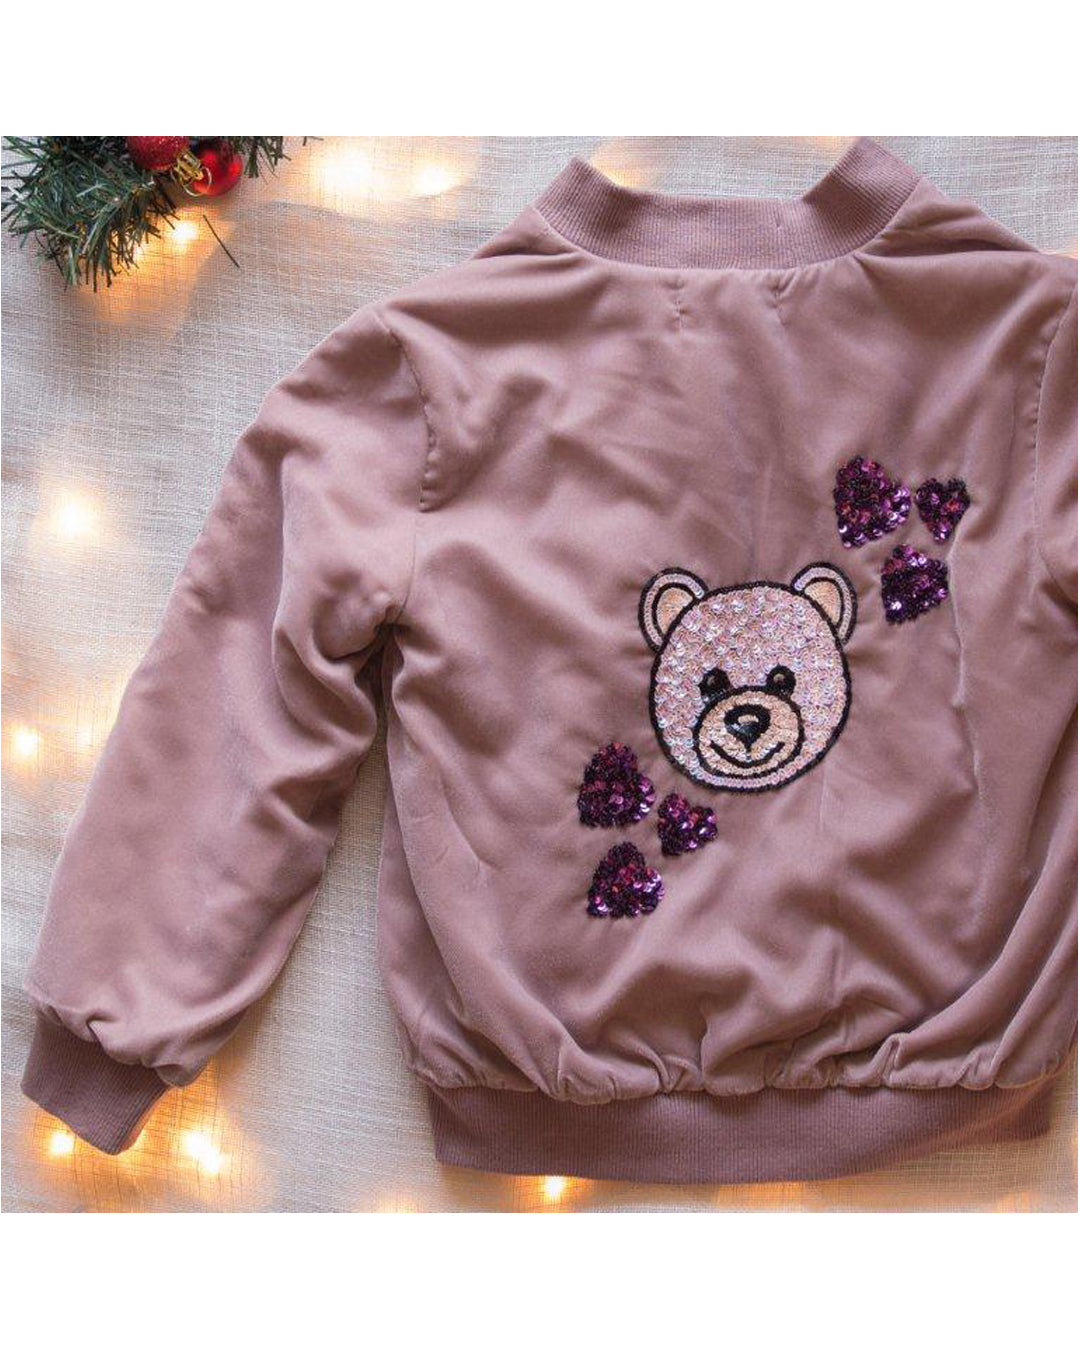 HELLO PANDA JACKET IN A BEAUTIFUL LILAC WITH PURPLE HEART EMBELLISHMENT           (LEAD TIME 10-15 DAYS)